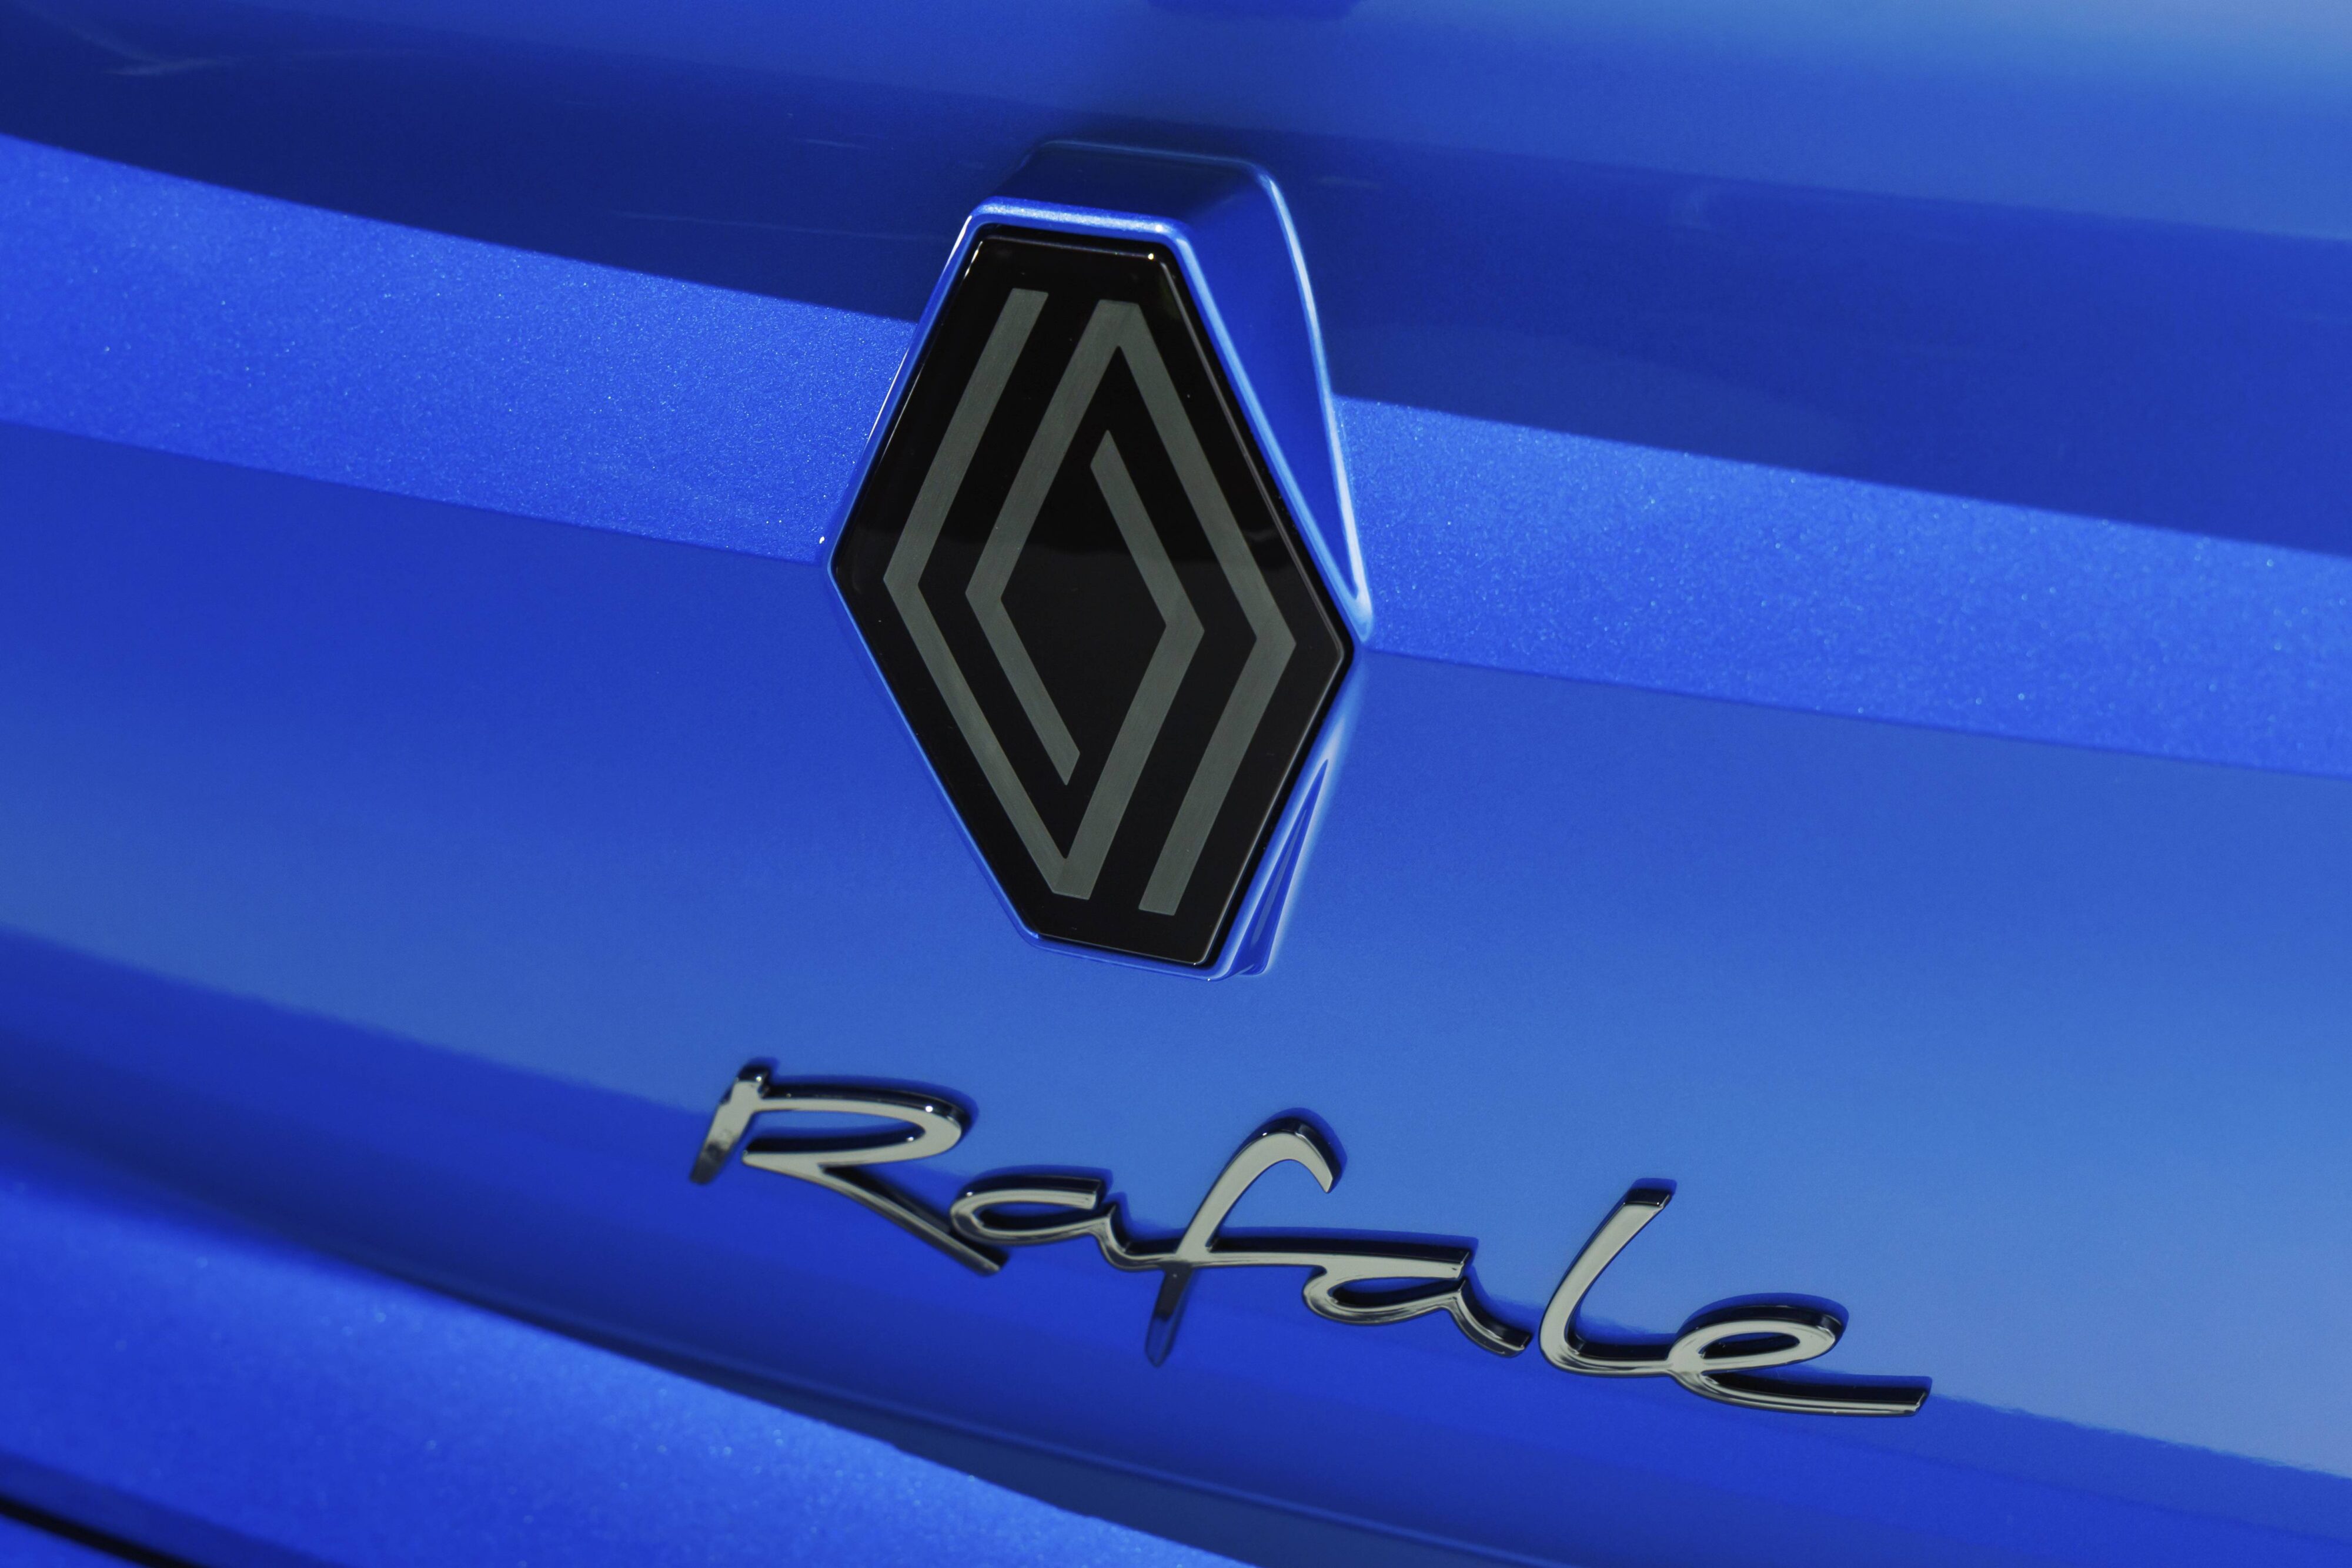 Focus on the Renault and Rafale badge on the rear of the Renault Rafale SUV in Alpine Blue